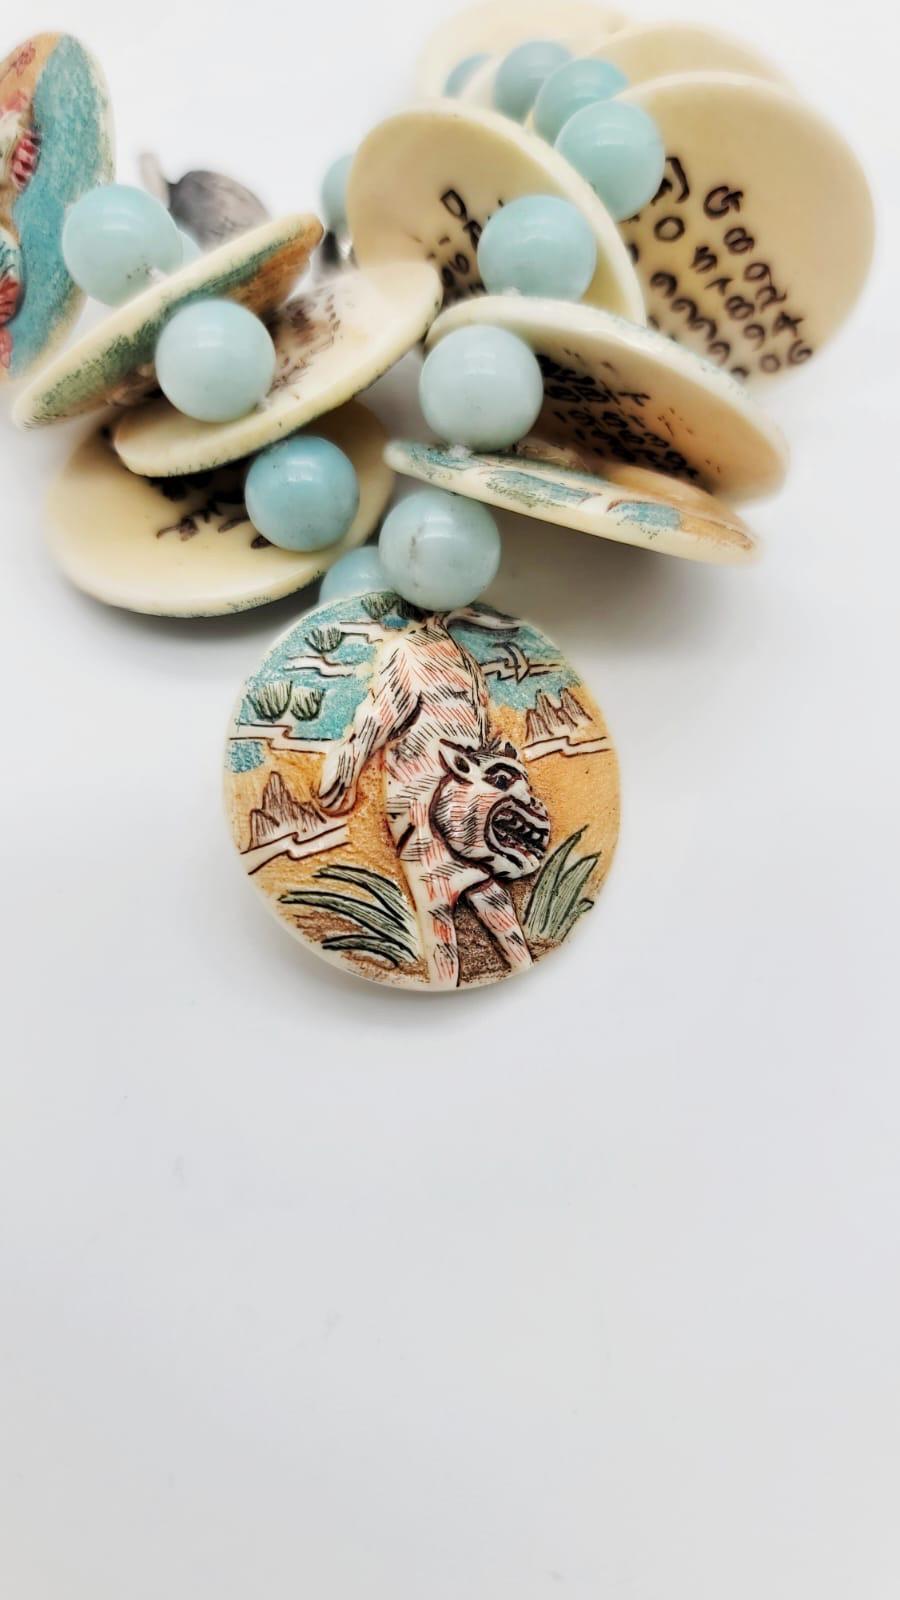 Mixed Cut A.Jeschel Bracelet hand-painted Chinese zodiac carved bone, Amazonite beads For Sale